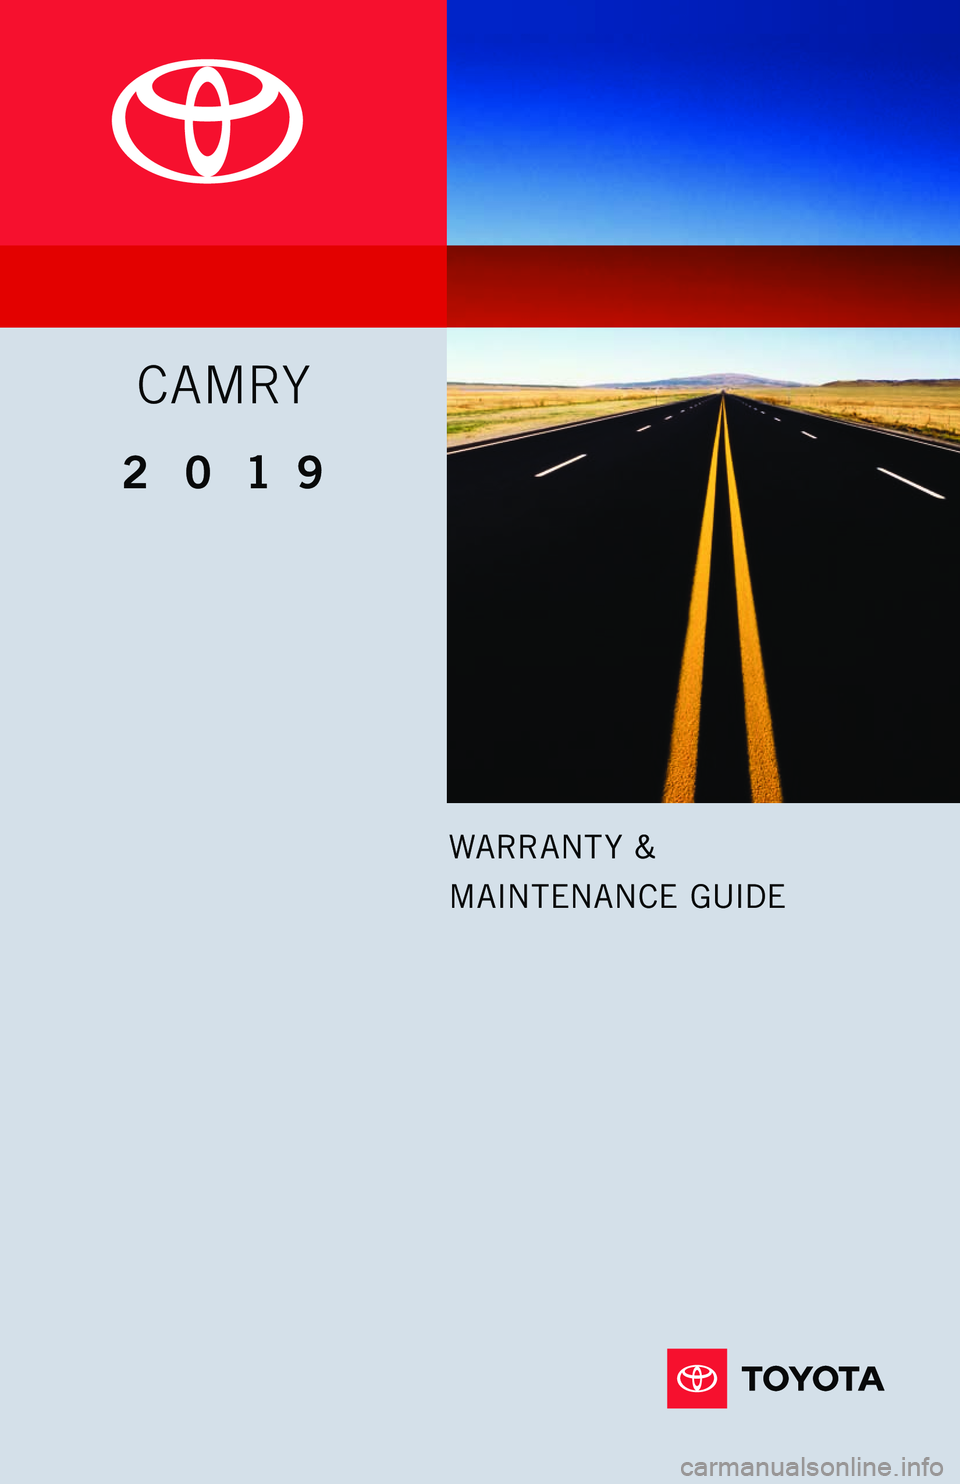 TOYOTA CAMRY 2019  Warranties & Maintenance Guides (in English) WARRANT Y &
MAINTENANCE  GUIDE
CAMRY
2019     
114586_18-TCS-11444_Toyota_WMG_MY19_Camry_COVER_1_1f_tw_R1.indd   37/16/18   8:31 PM   